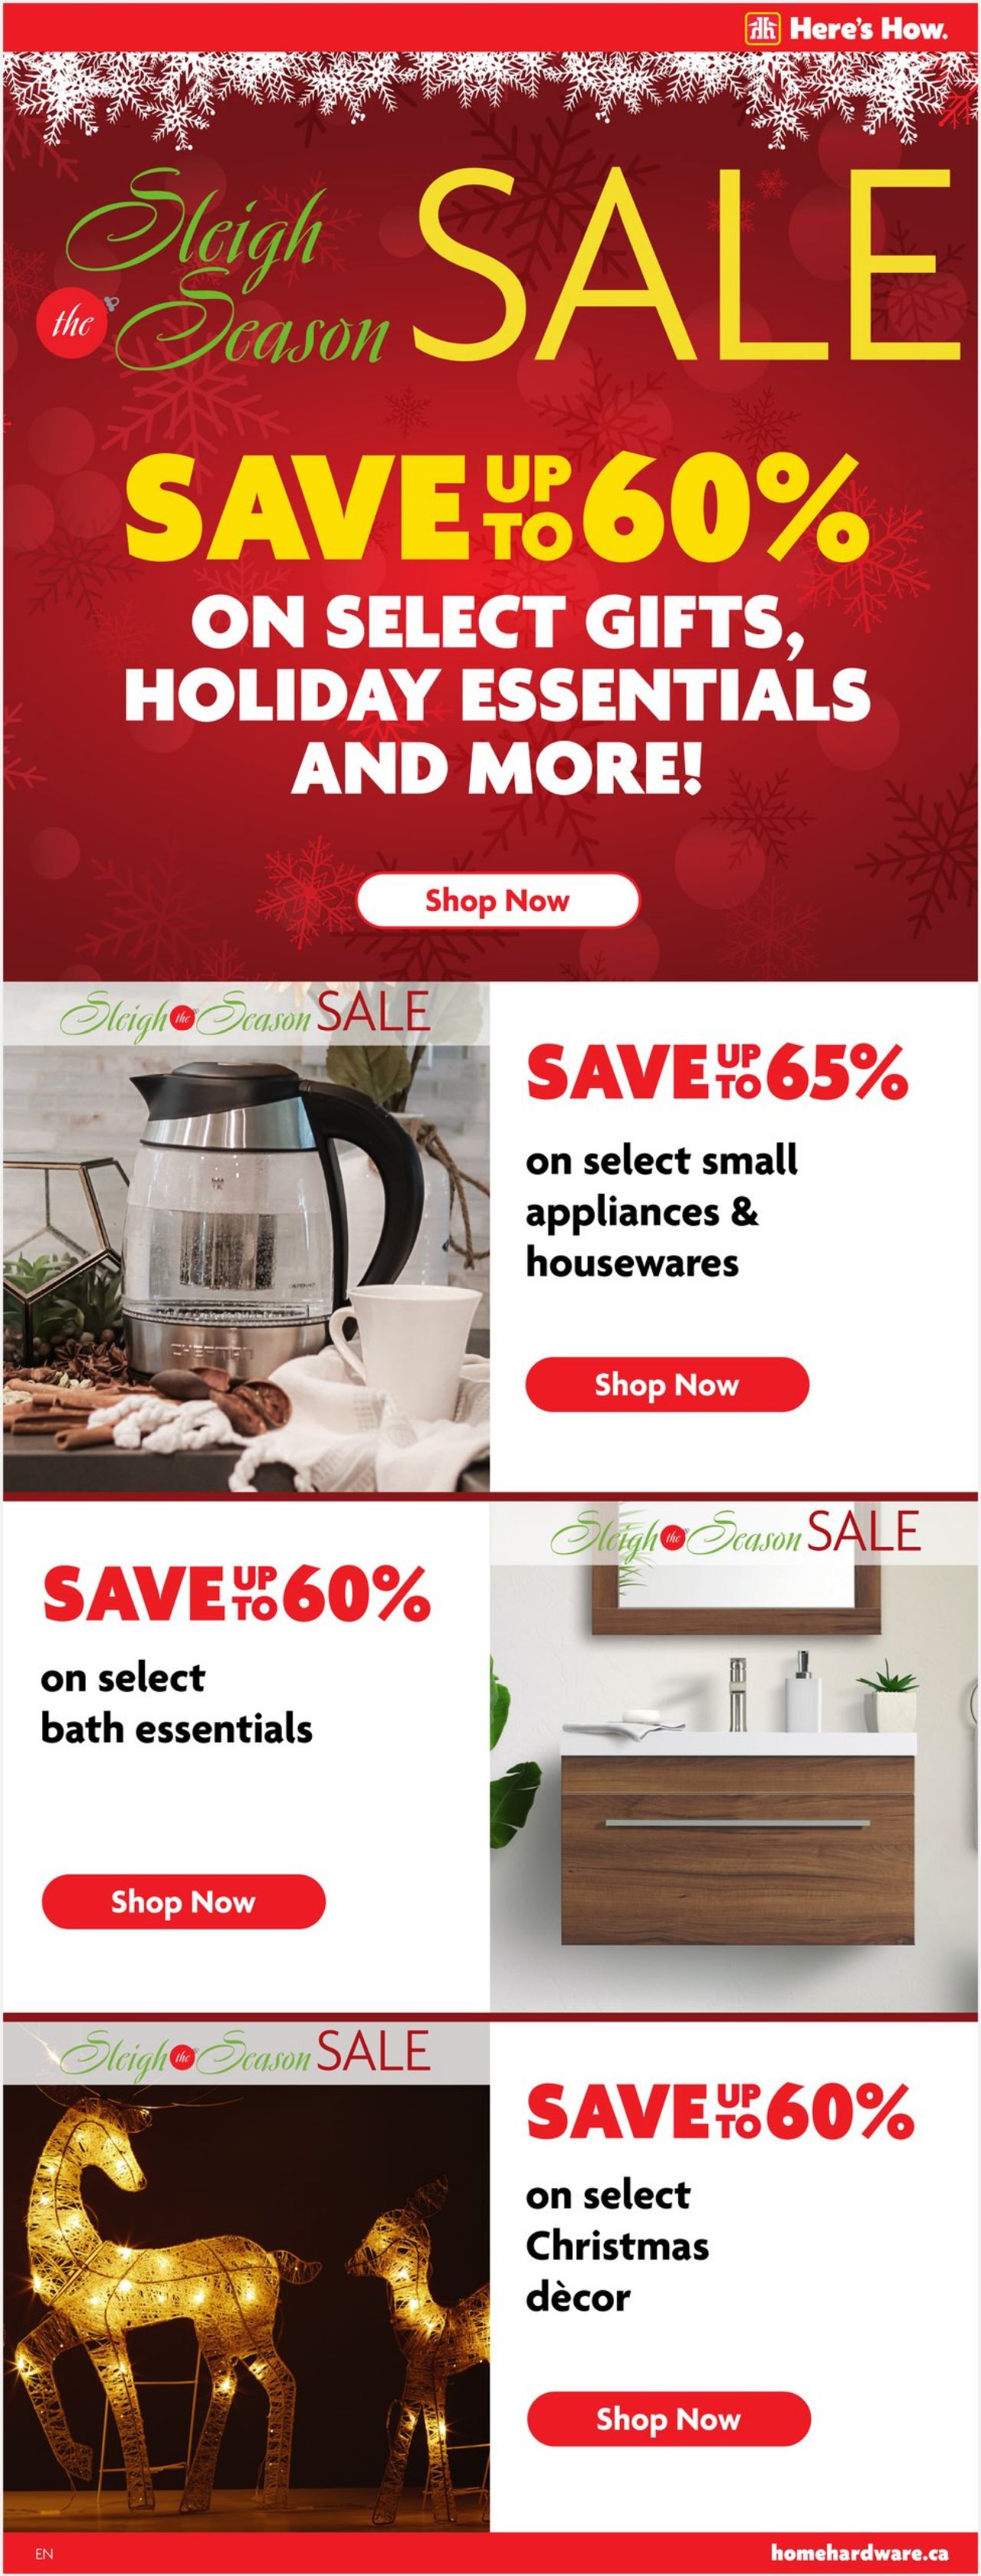 Home Hardware Promotional Flyer Christmas Valid from 21.12 to 03.01